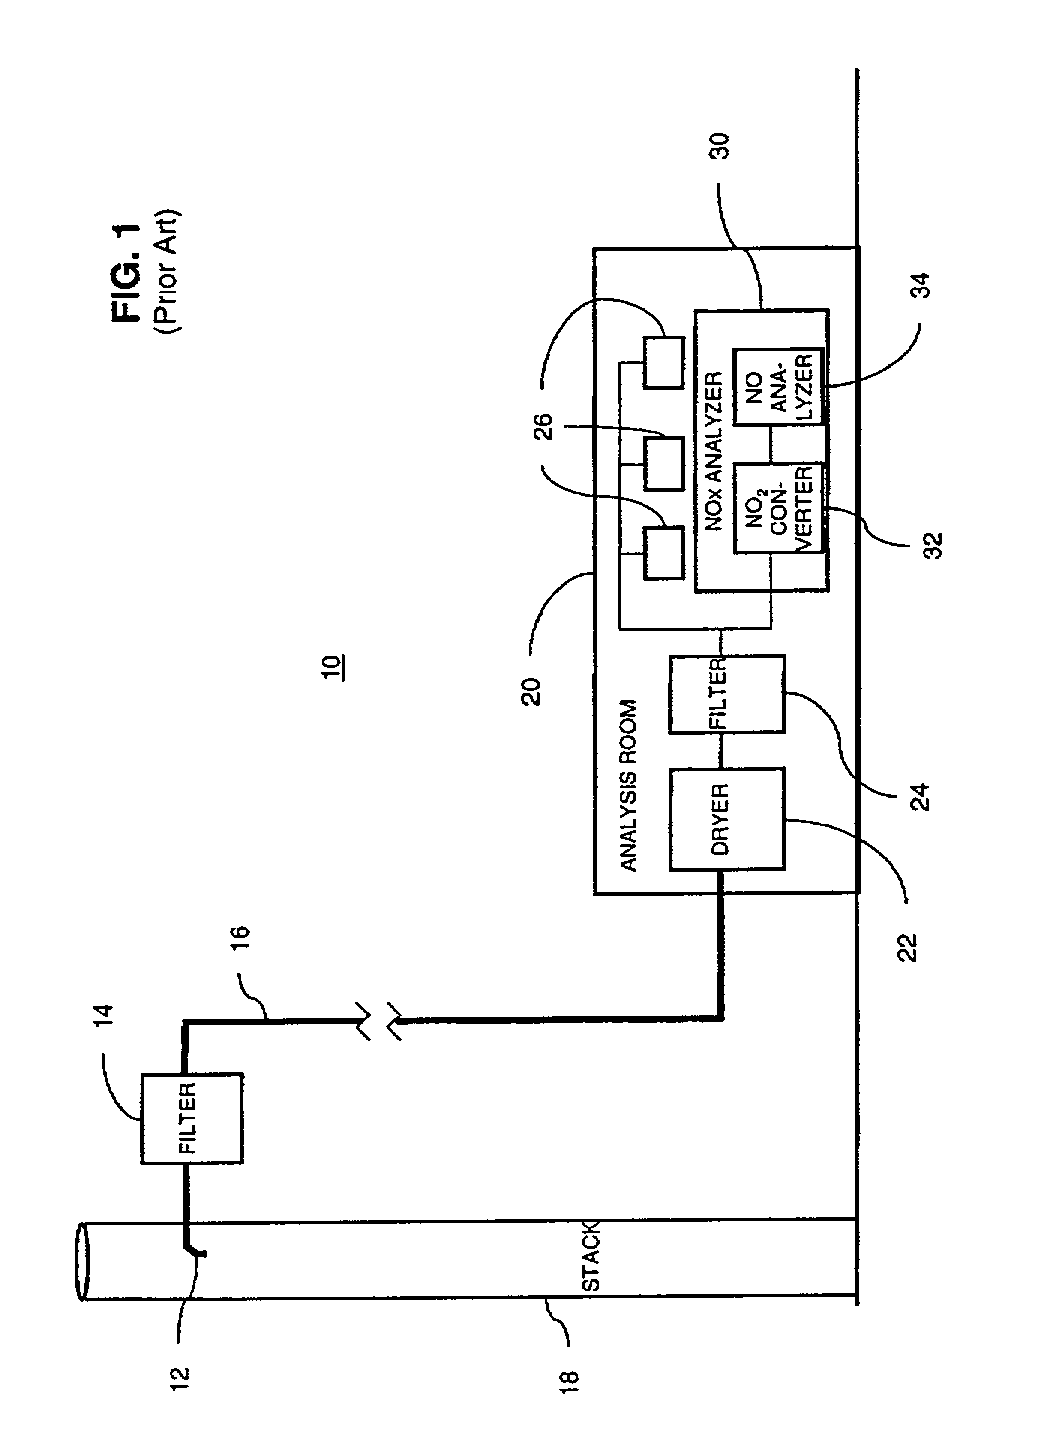 Method and system for monitoring combustion source emissions